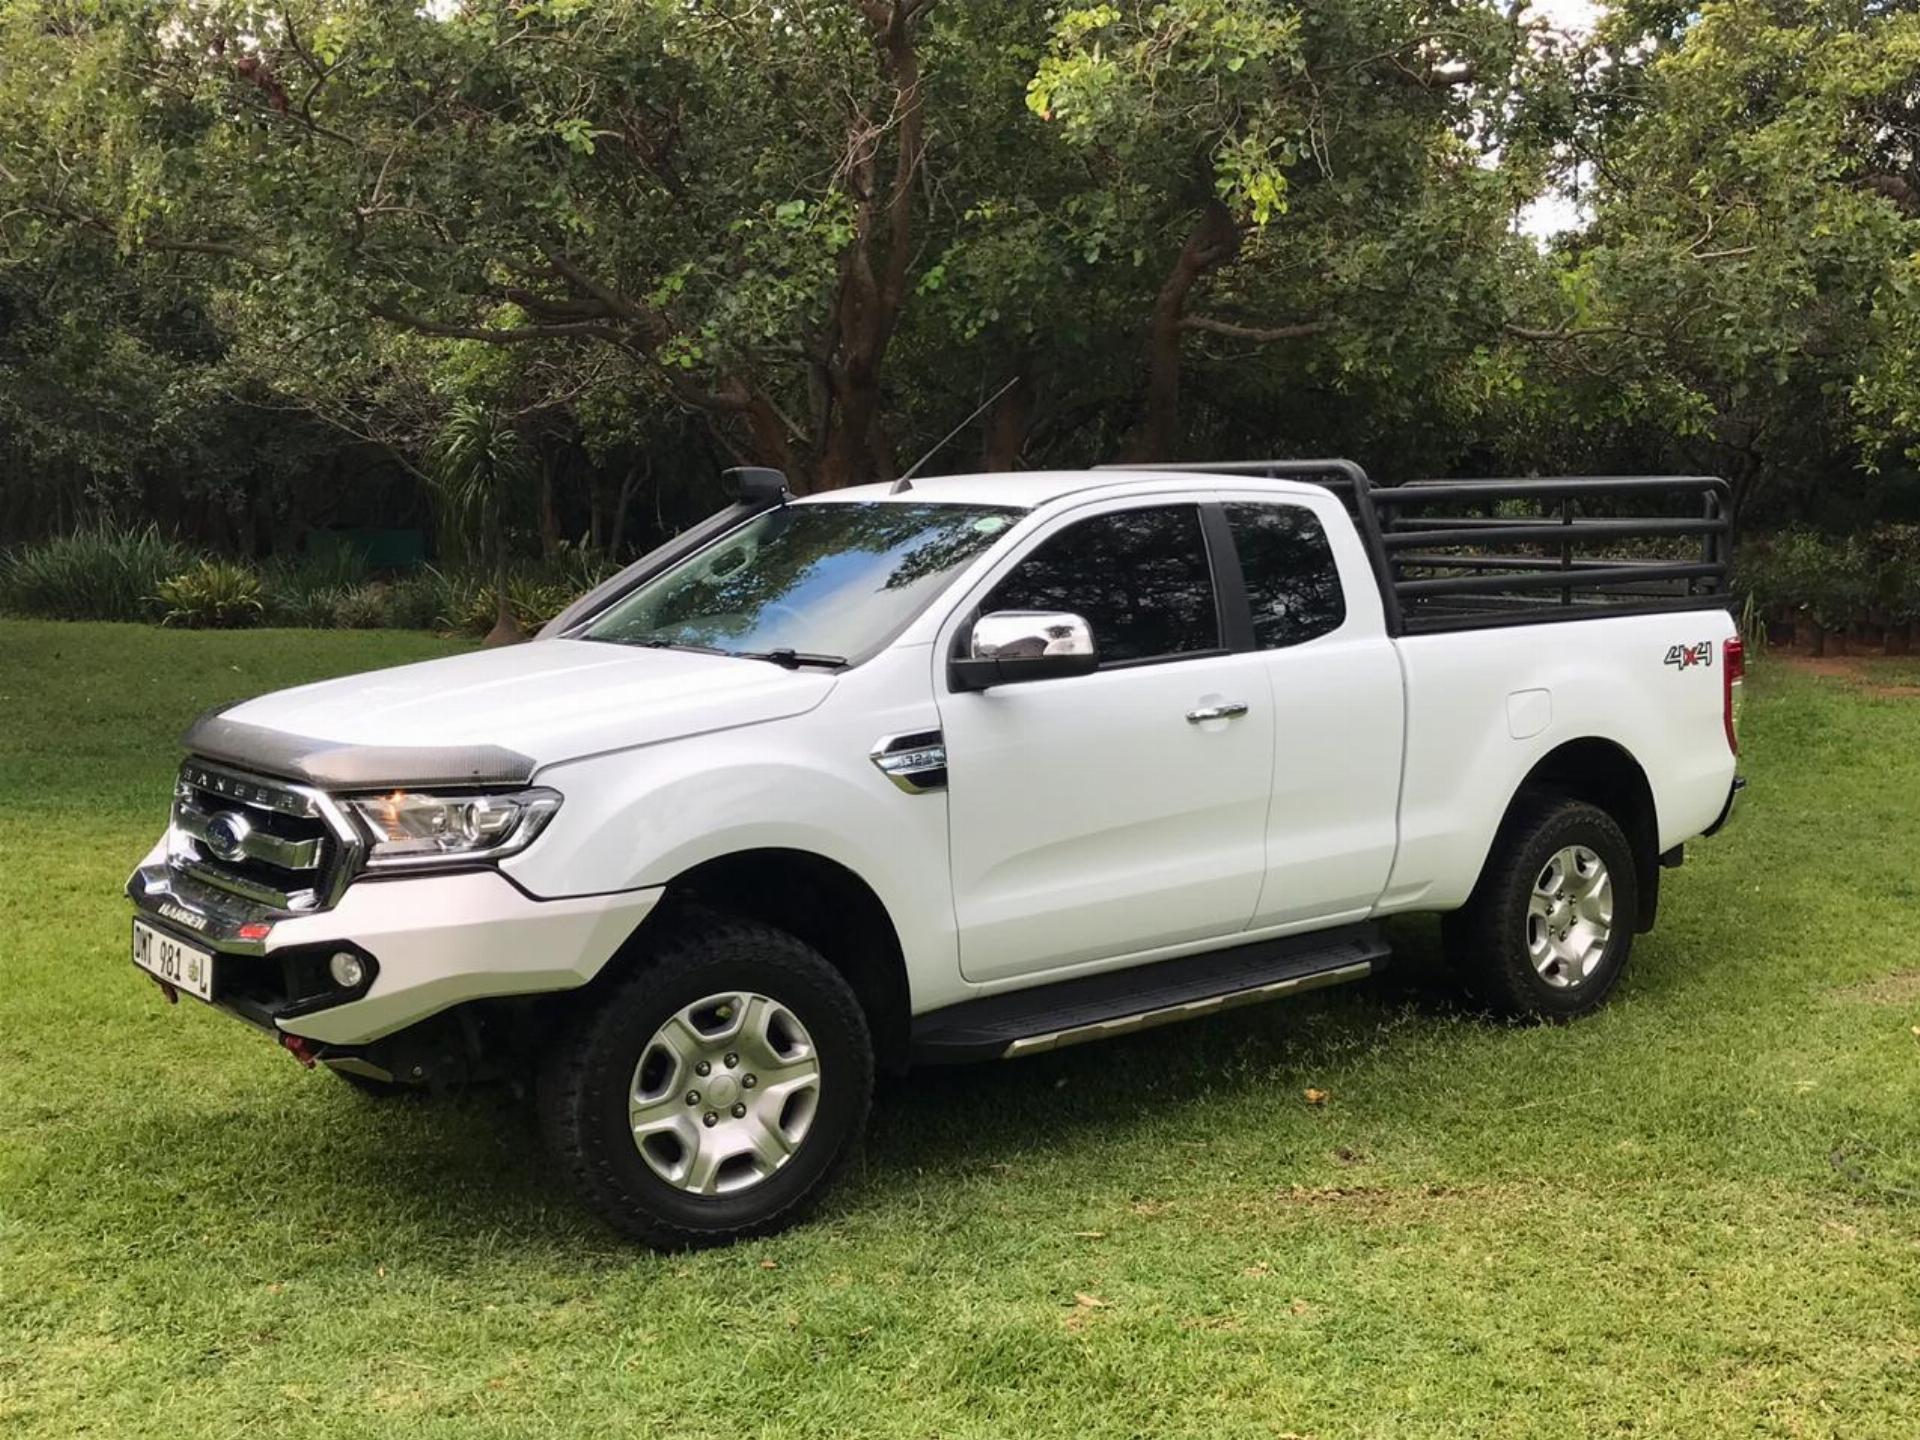 Used Ford Ranger 3.2 Tdci Super Cab XLS Auto 4X4 2016 on auction ...